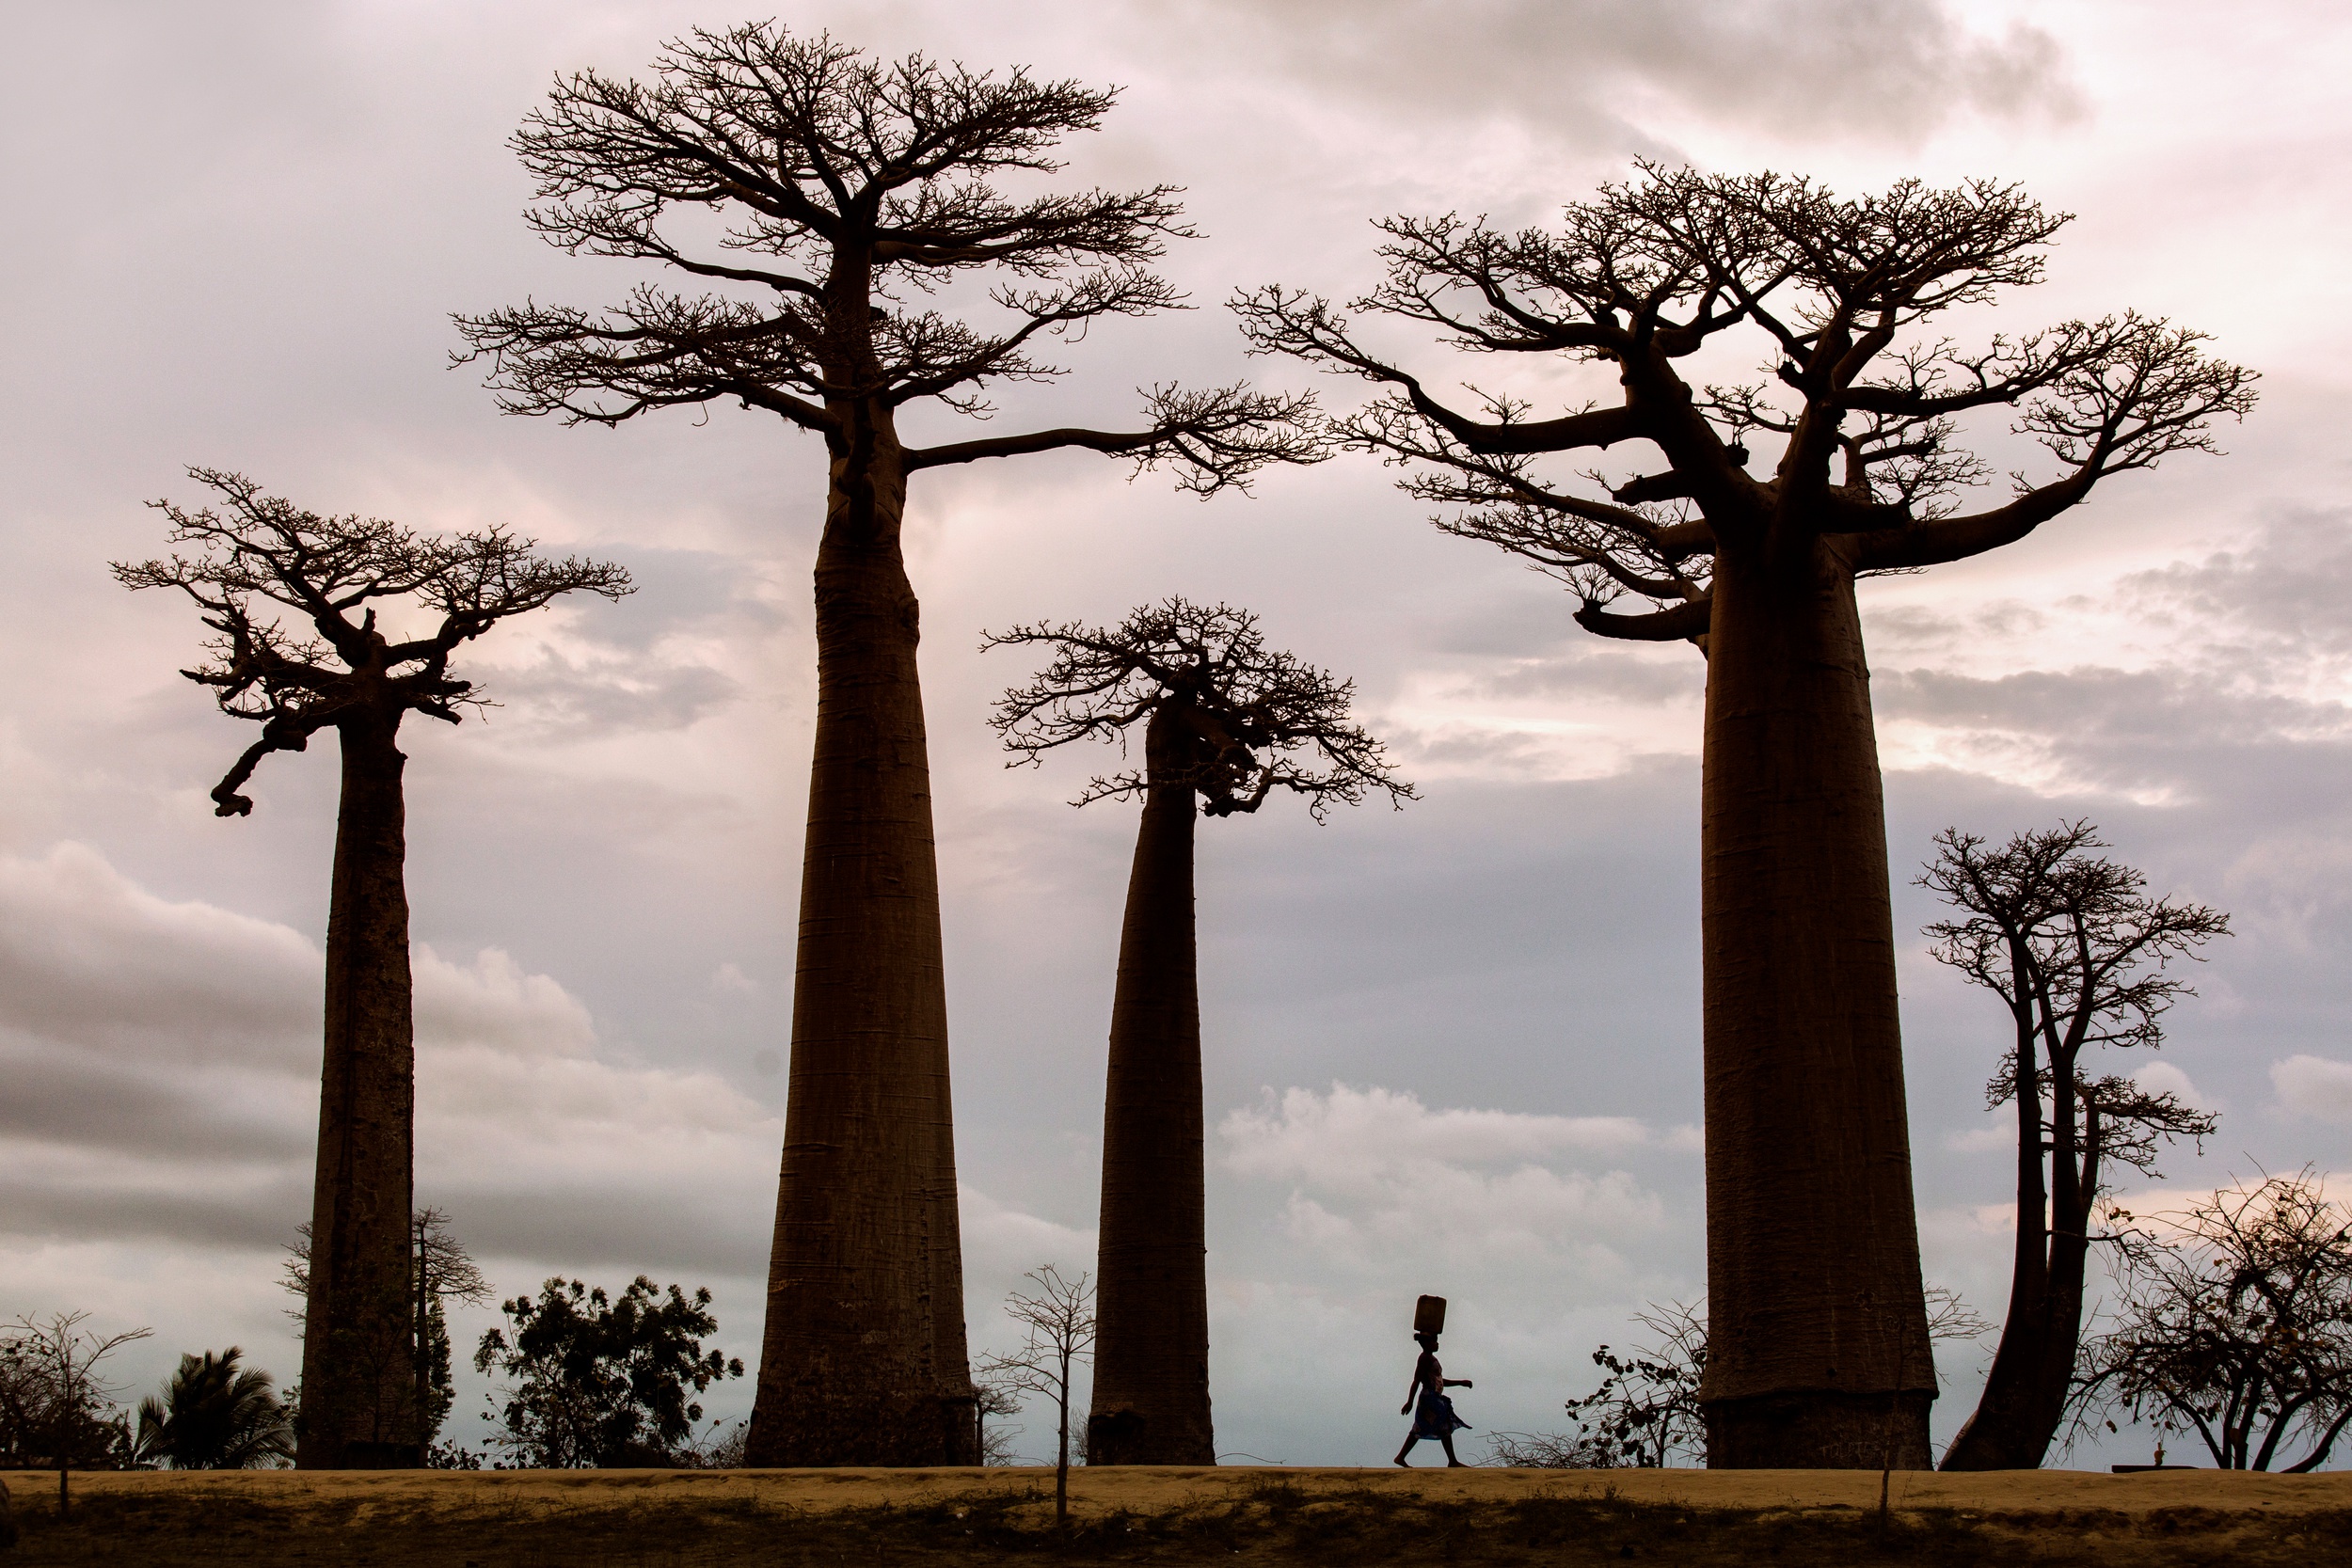 Africa Trees Plants Baobab Trees Baobabs Nature 2500x1667